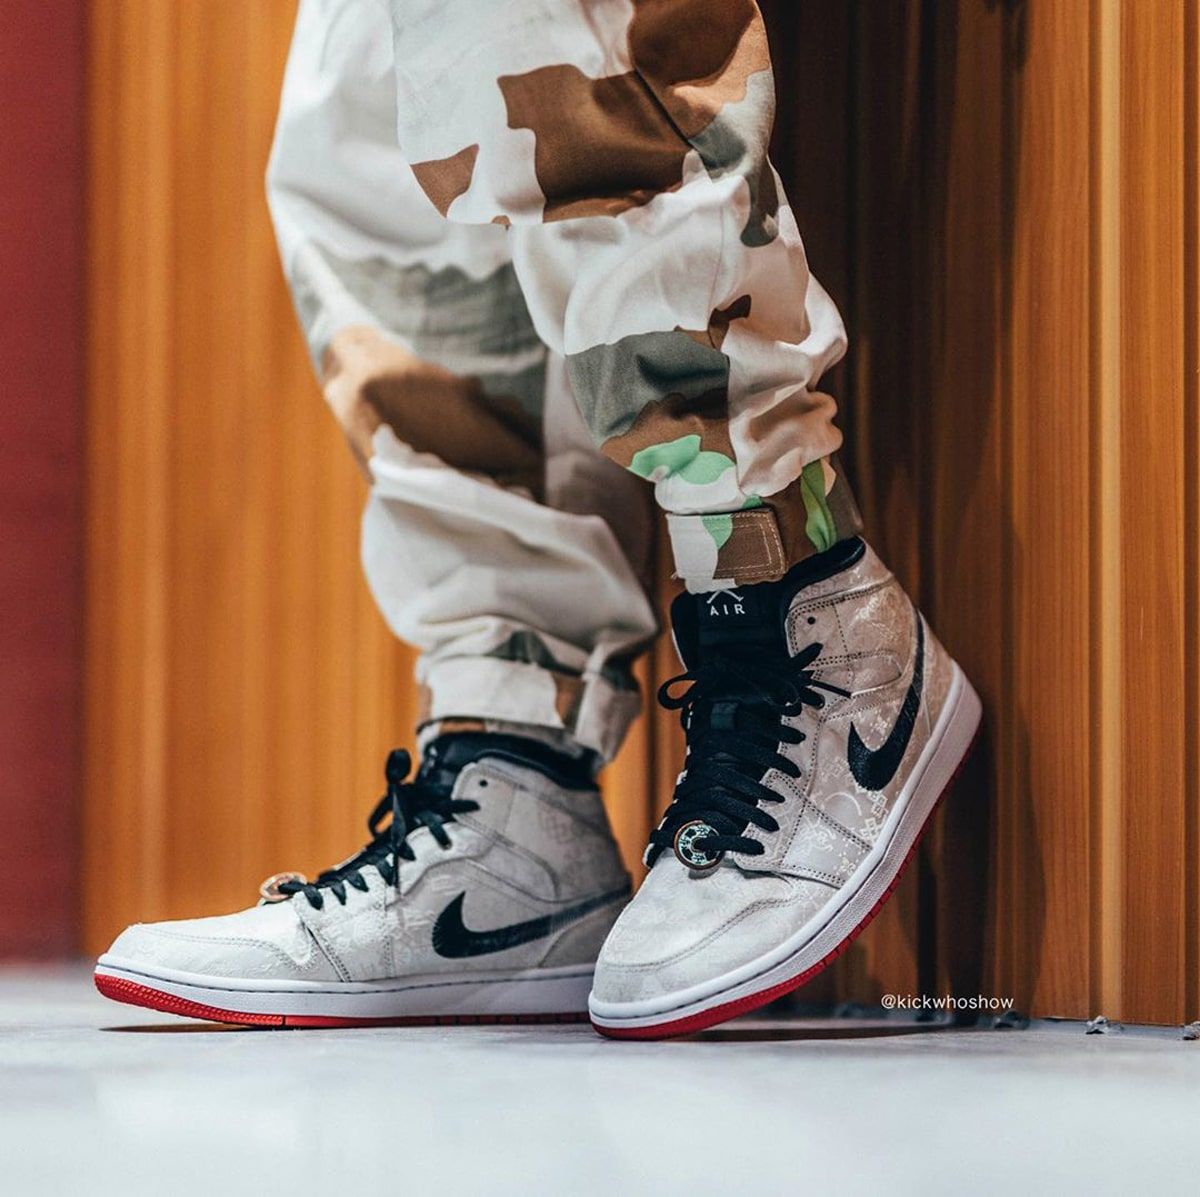 Where to Buy the CLOT X Air Jordan 1 Mid “Fearless” | House of Heat°